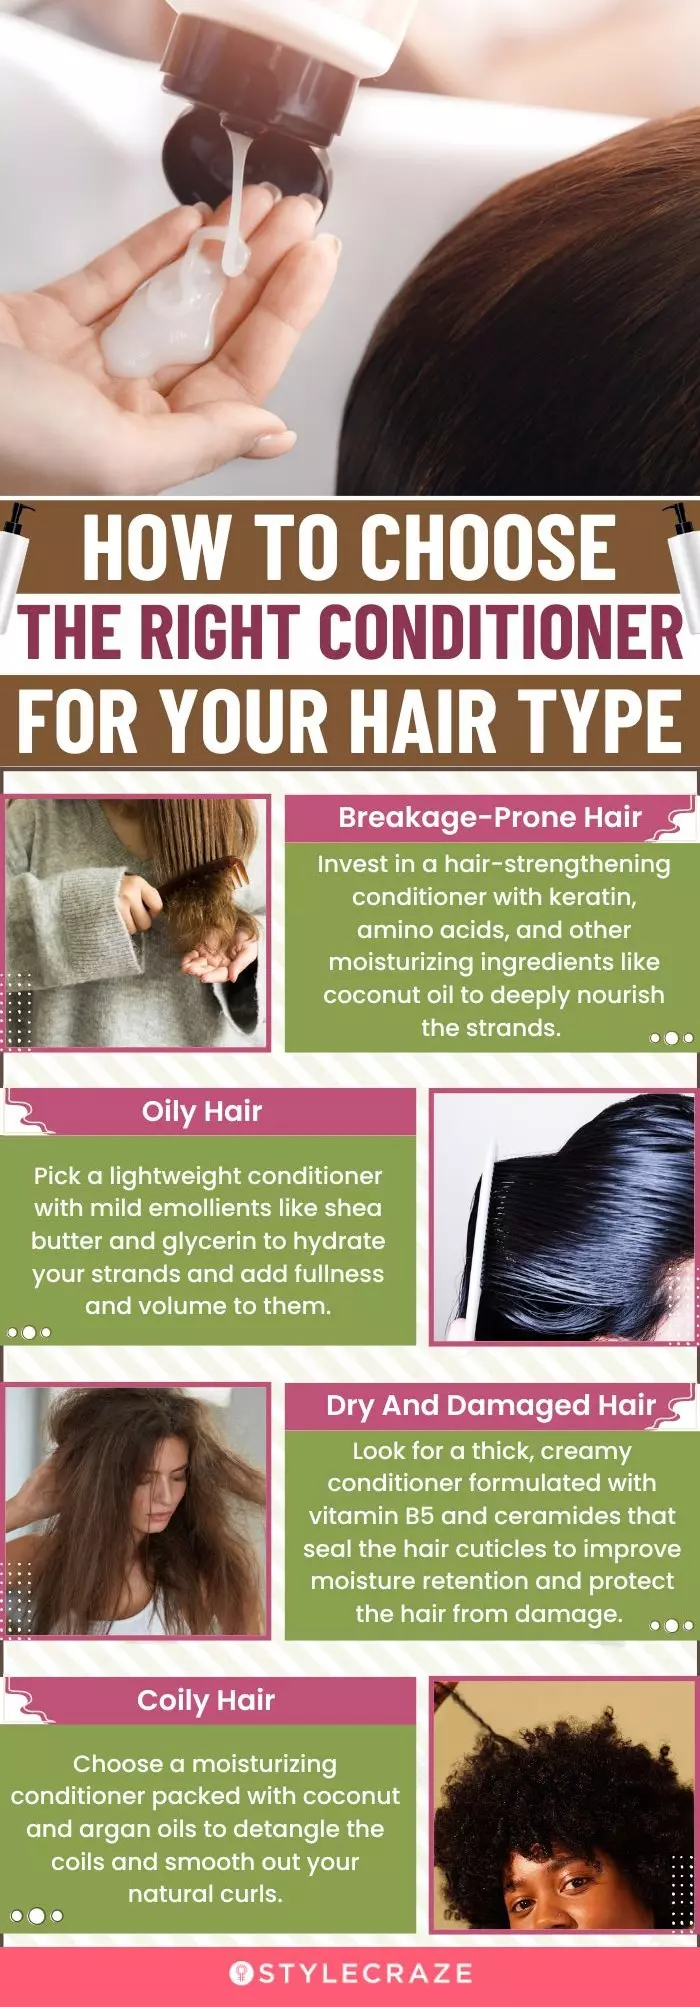 How To Choose The Right Conditioner For Your Hair Type (infographic)